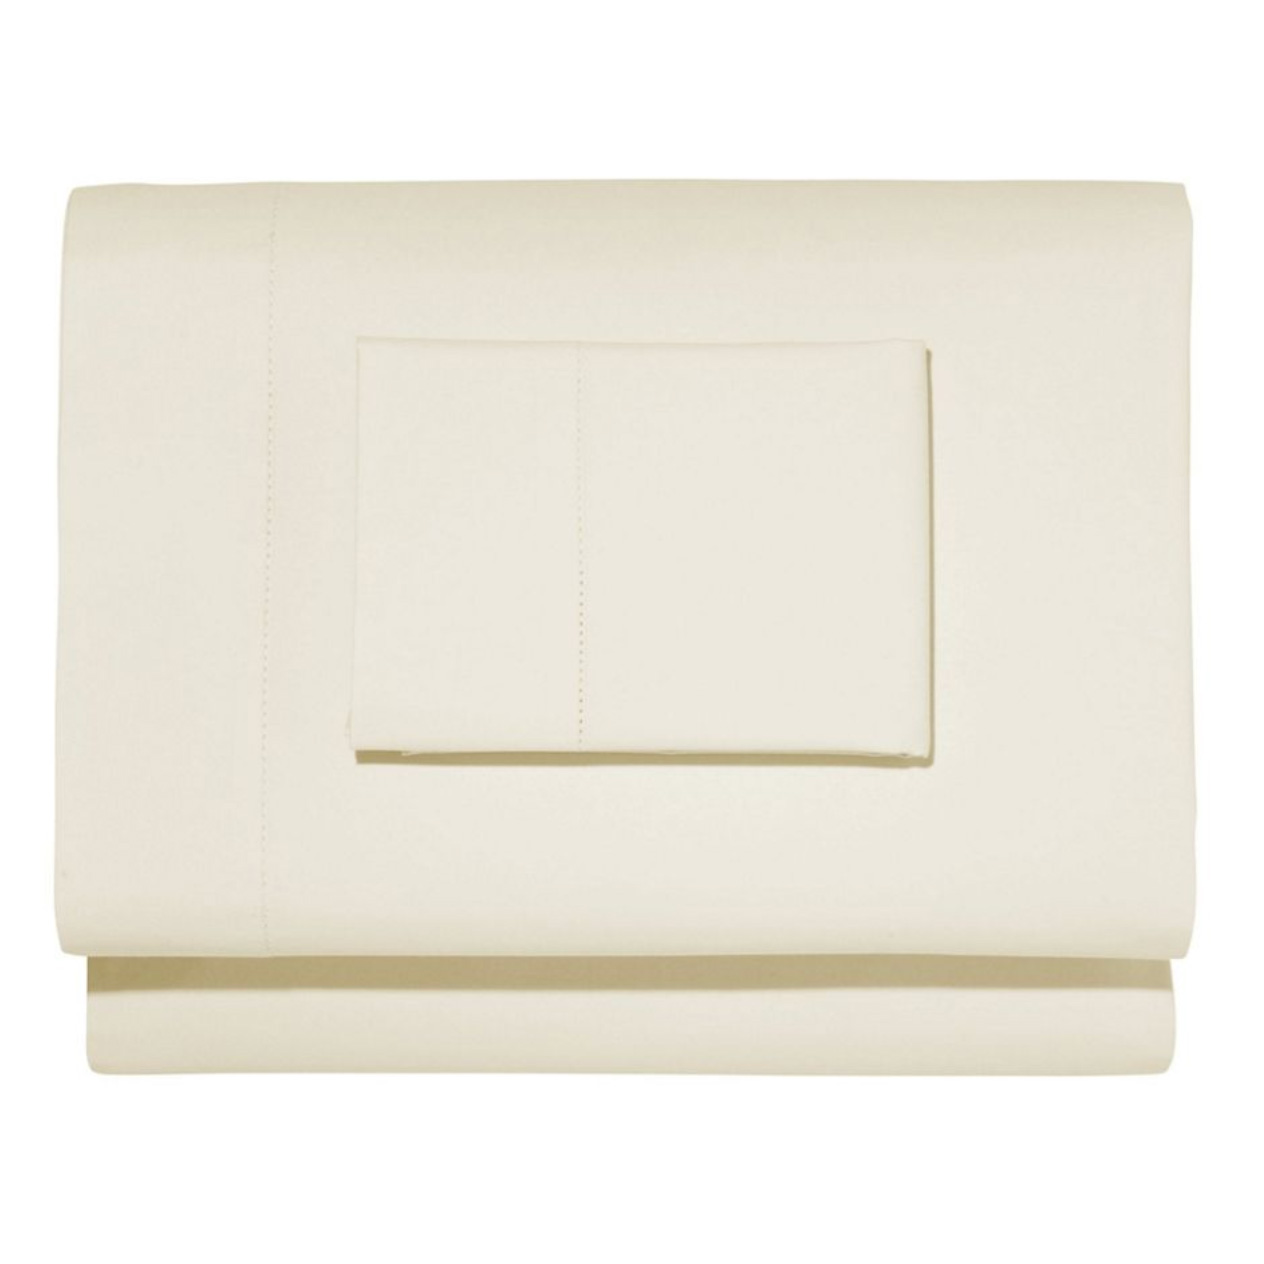 Top view of folded cream-colored bedsheet